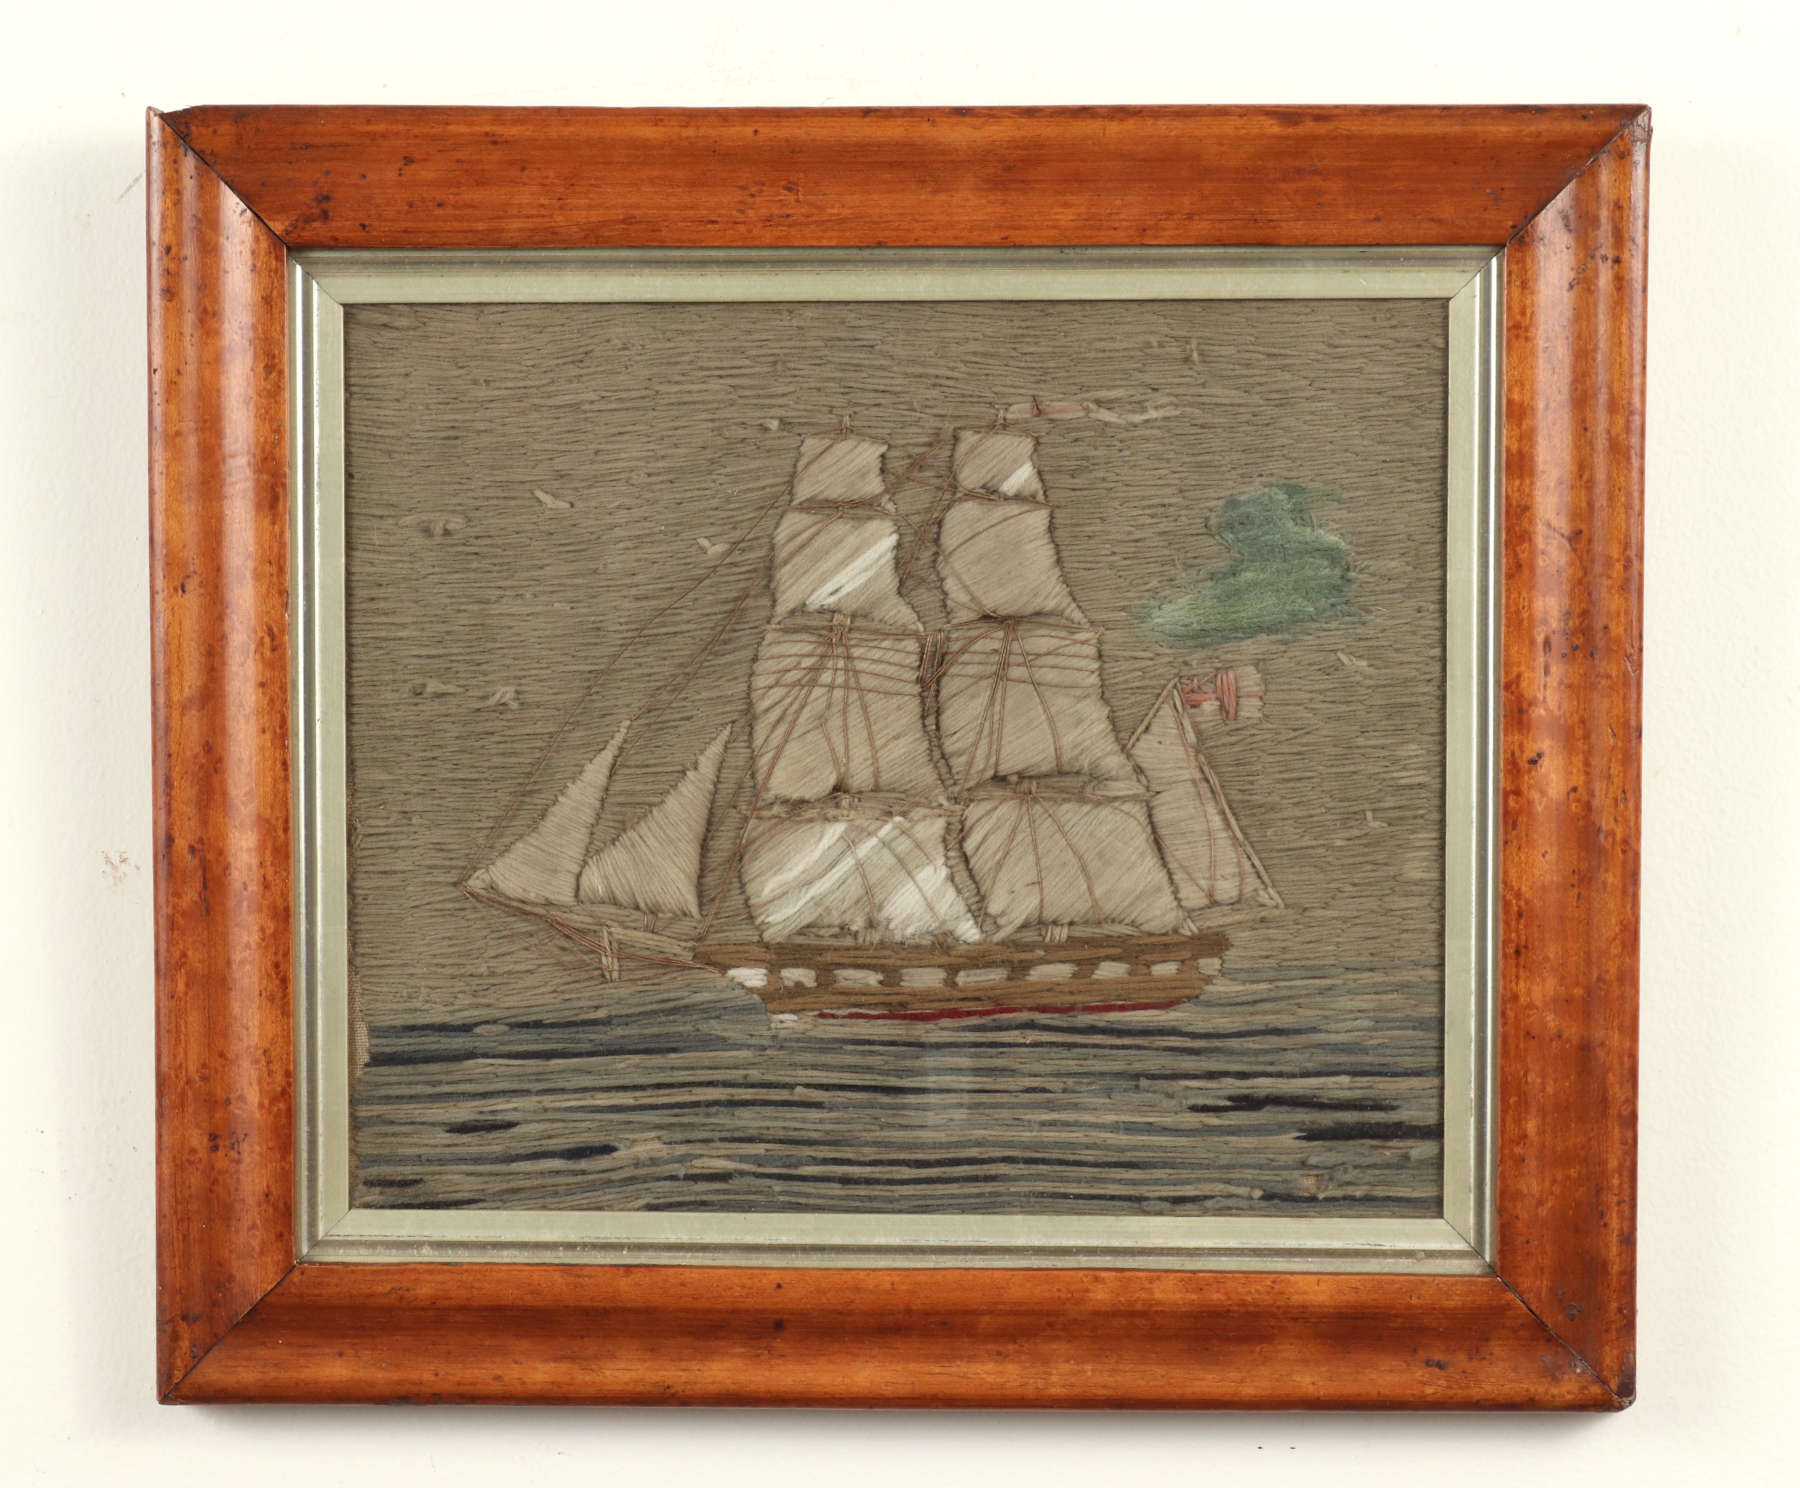 British Sailor's Woolwork Ship Picture (Woolie), 19th c.